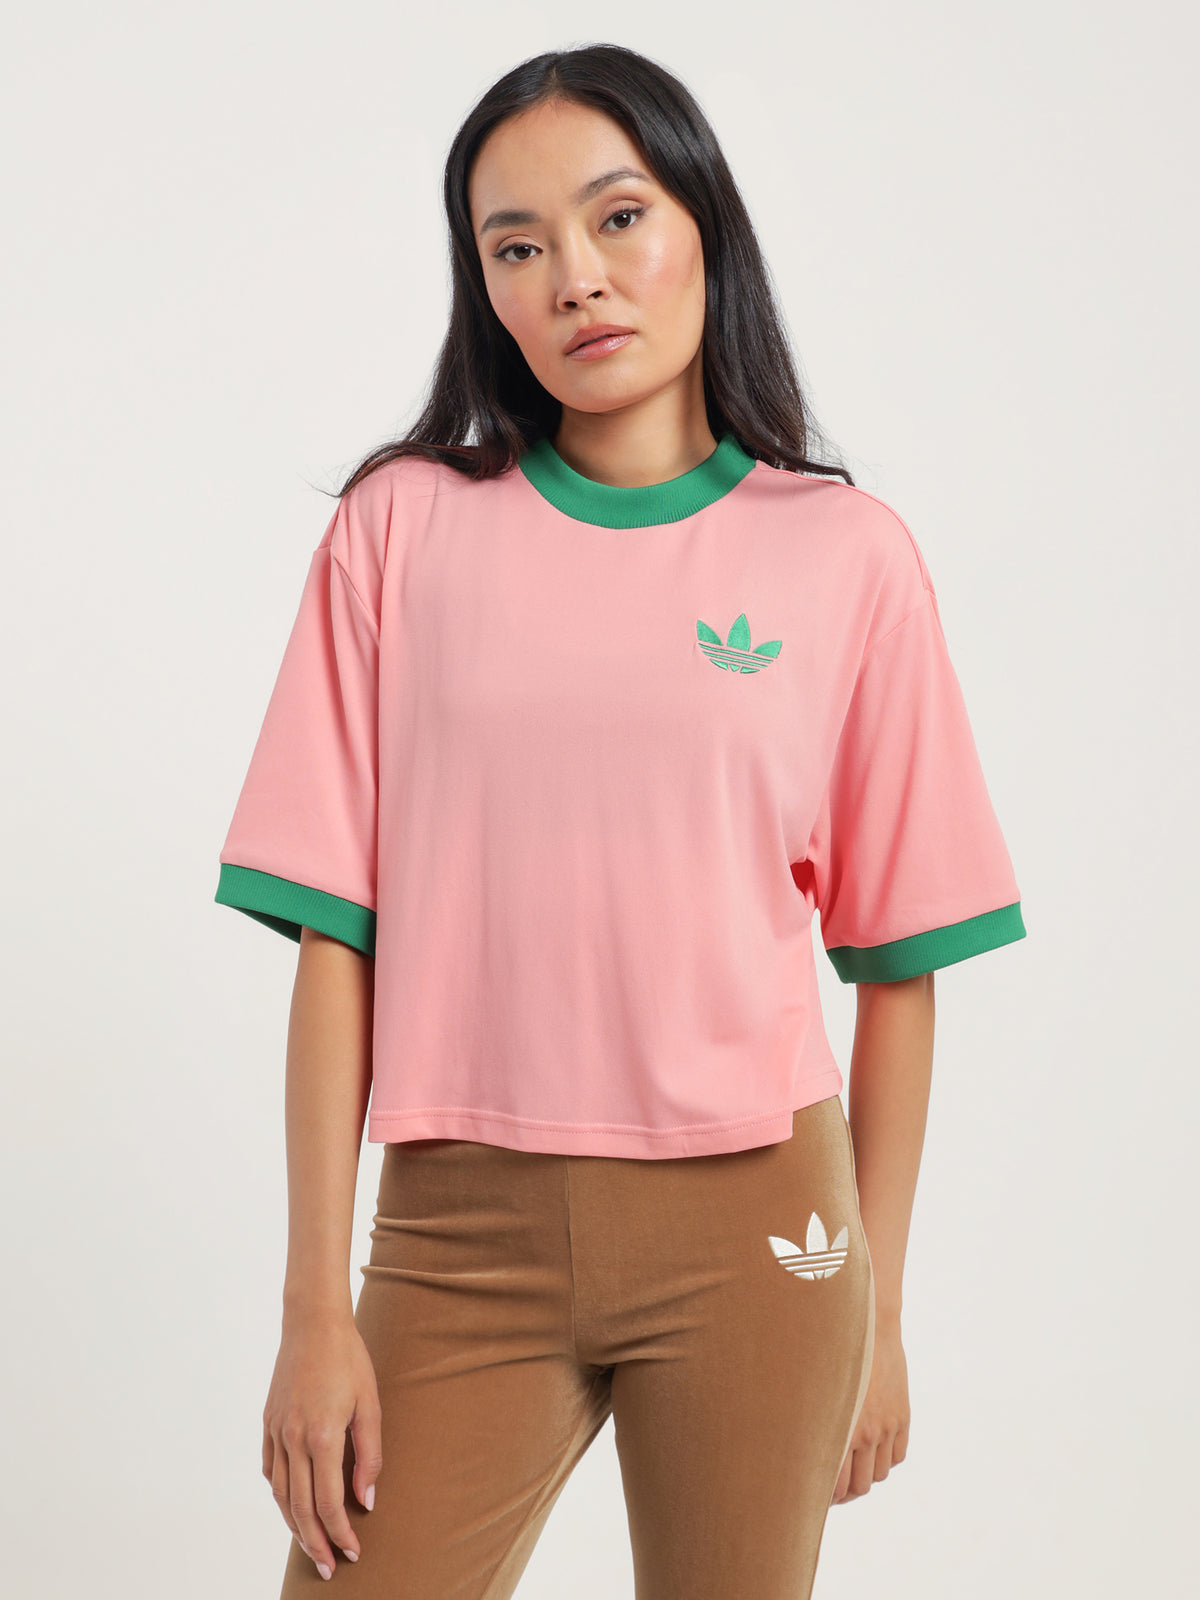 ADICOLOR 70s Heritage Now Oversized T-Shirt in Pink